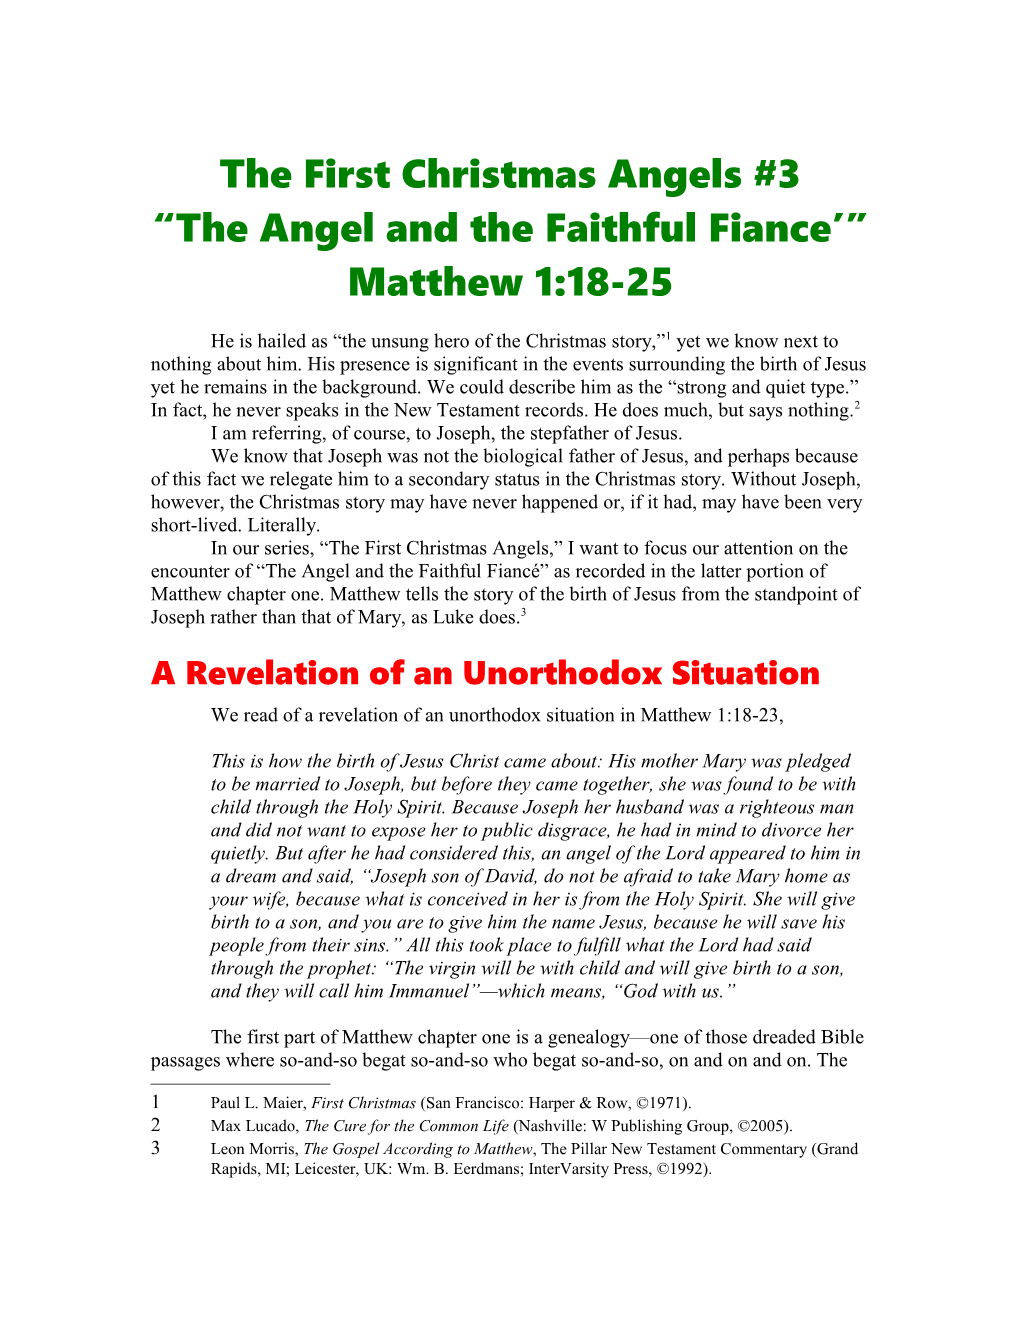 The First Christmas Angels #1